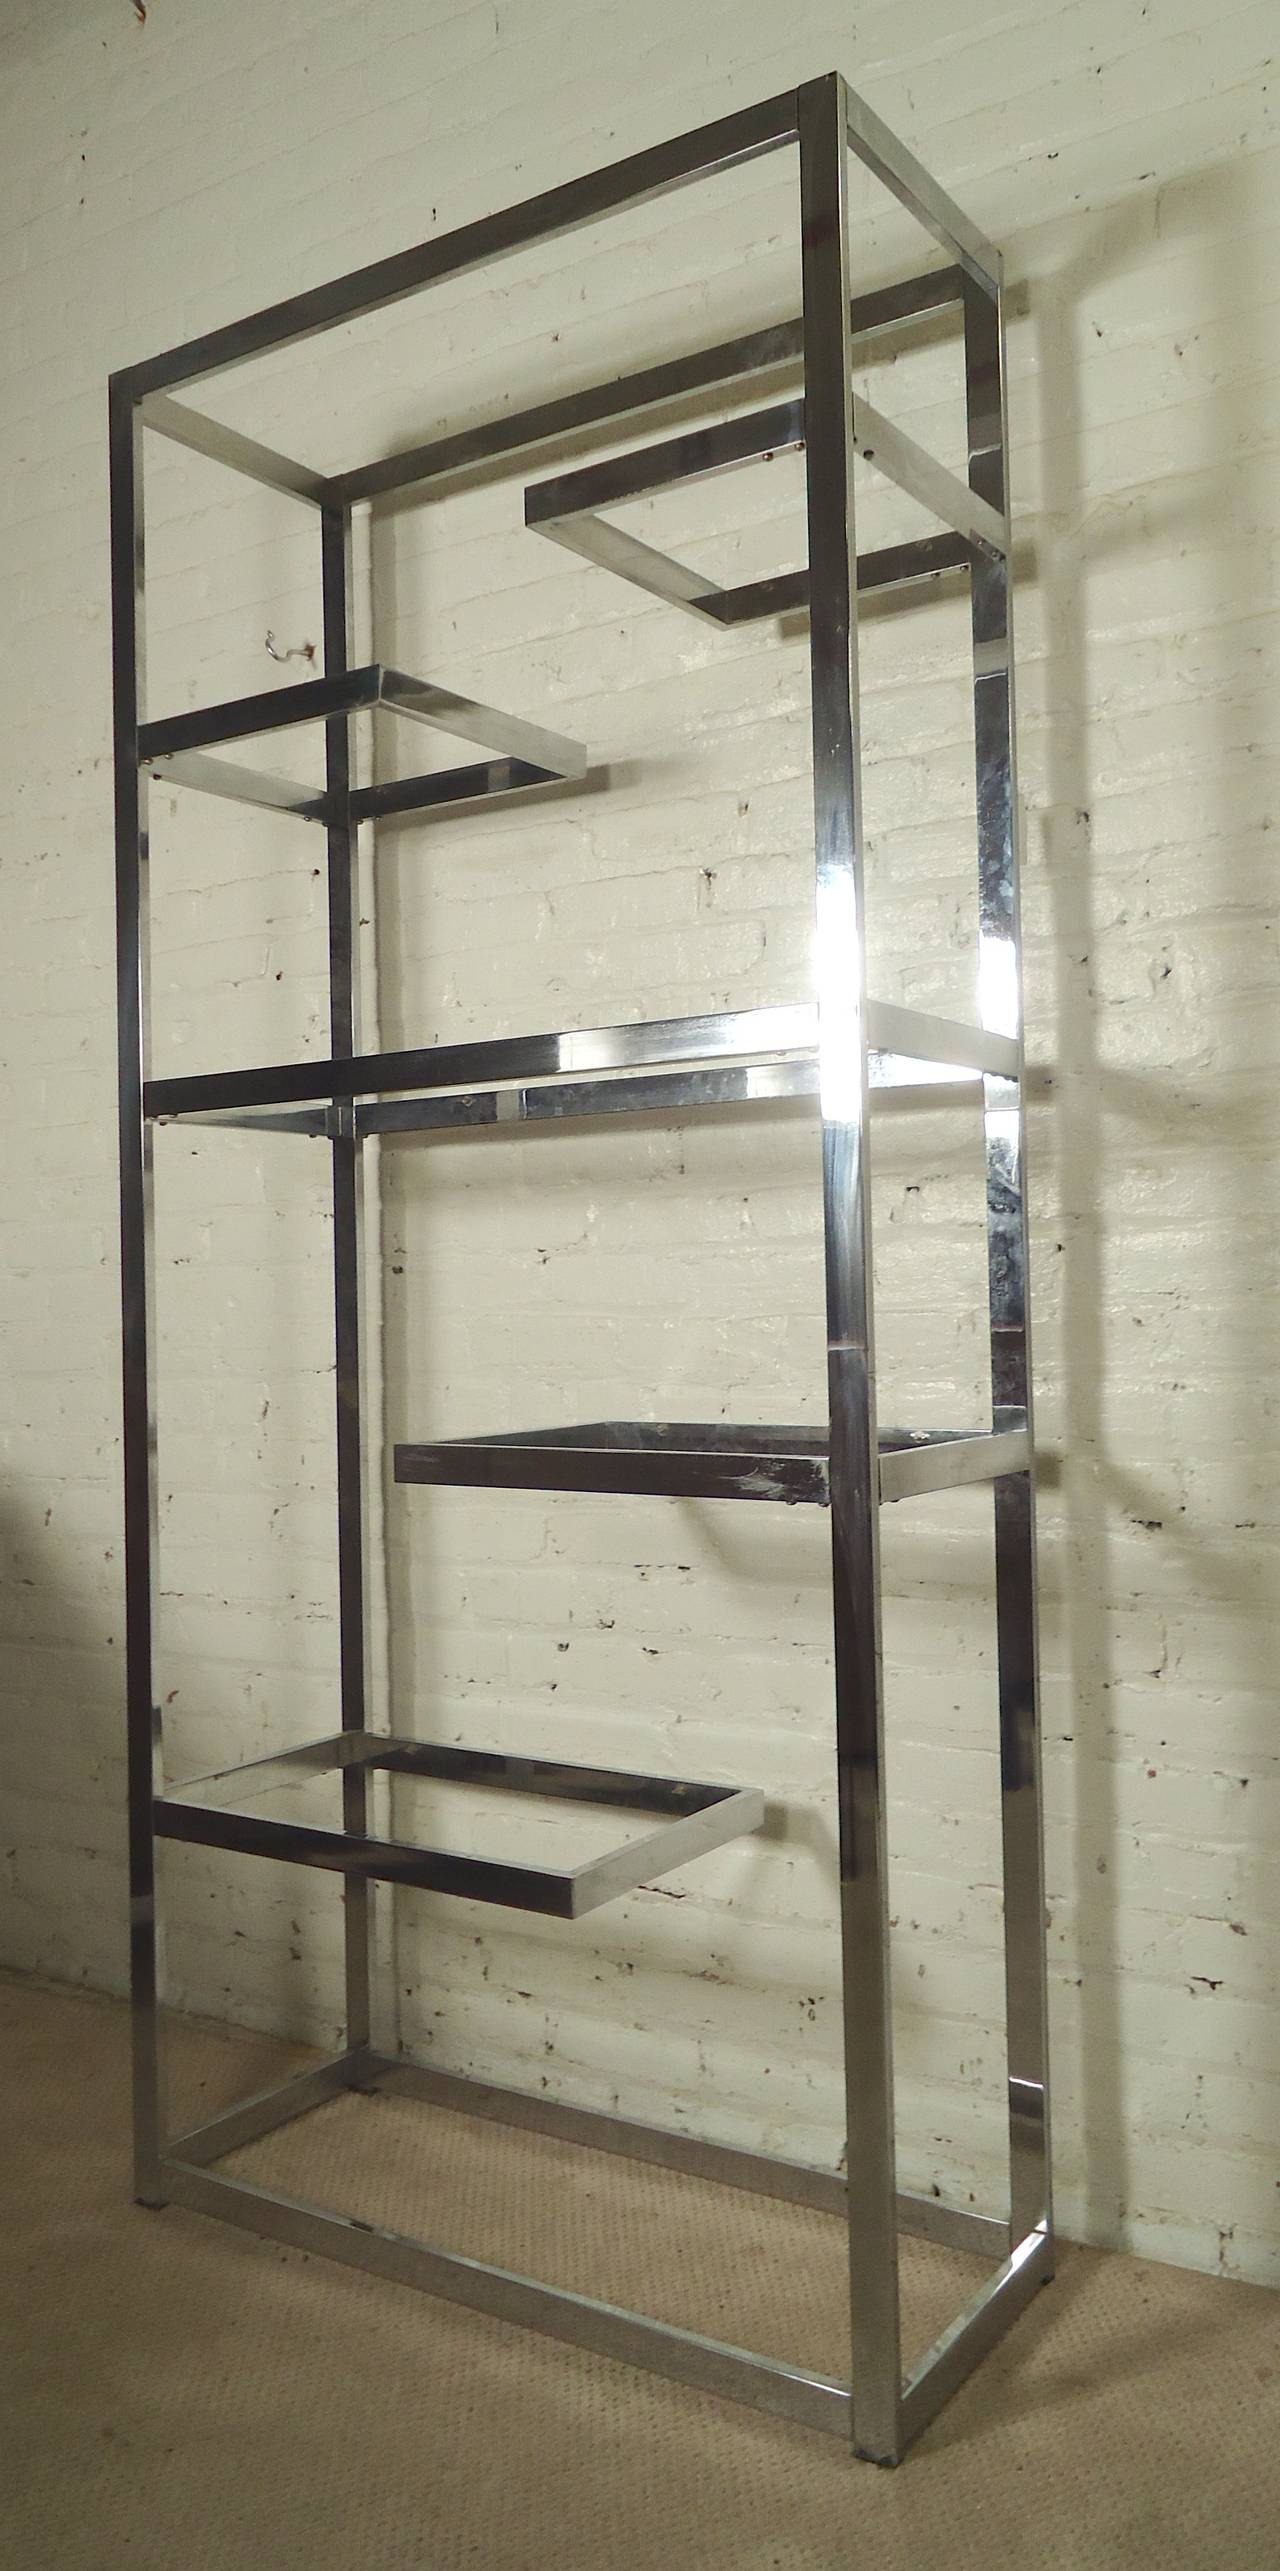 Milo Baughman shelving unit in polished chrome with step level design. Attractive storage unit for home or office.

(Please confirm item location - NY or NJ - with dealer).